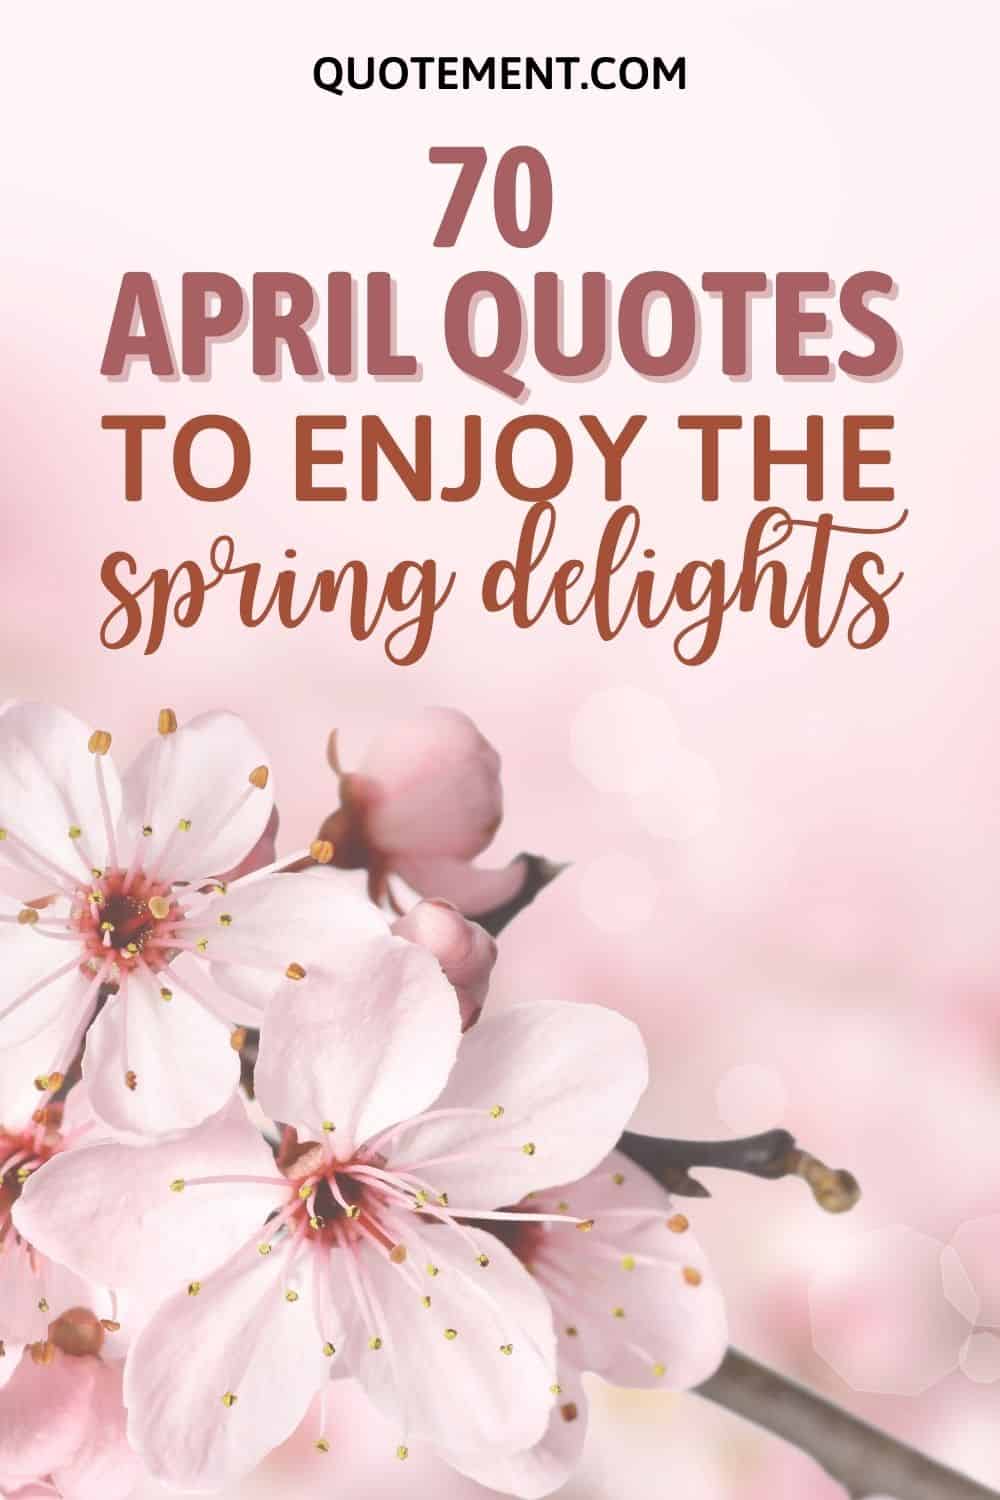 Awesome List of 70 April Quotes To Spring Into The Season
